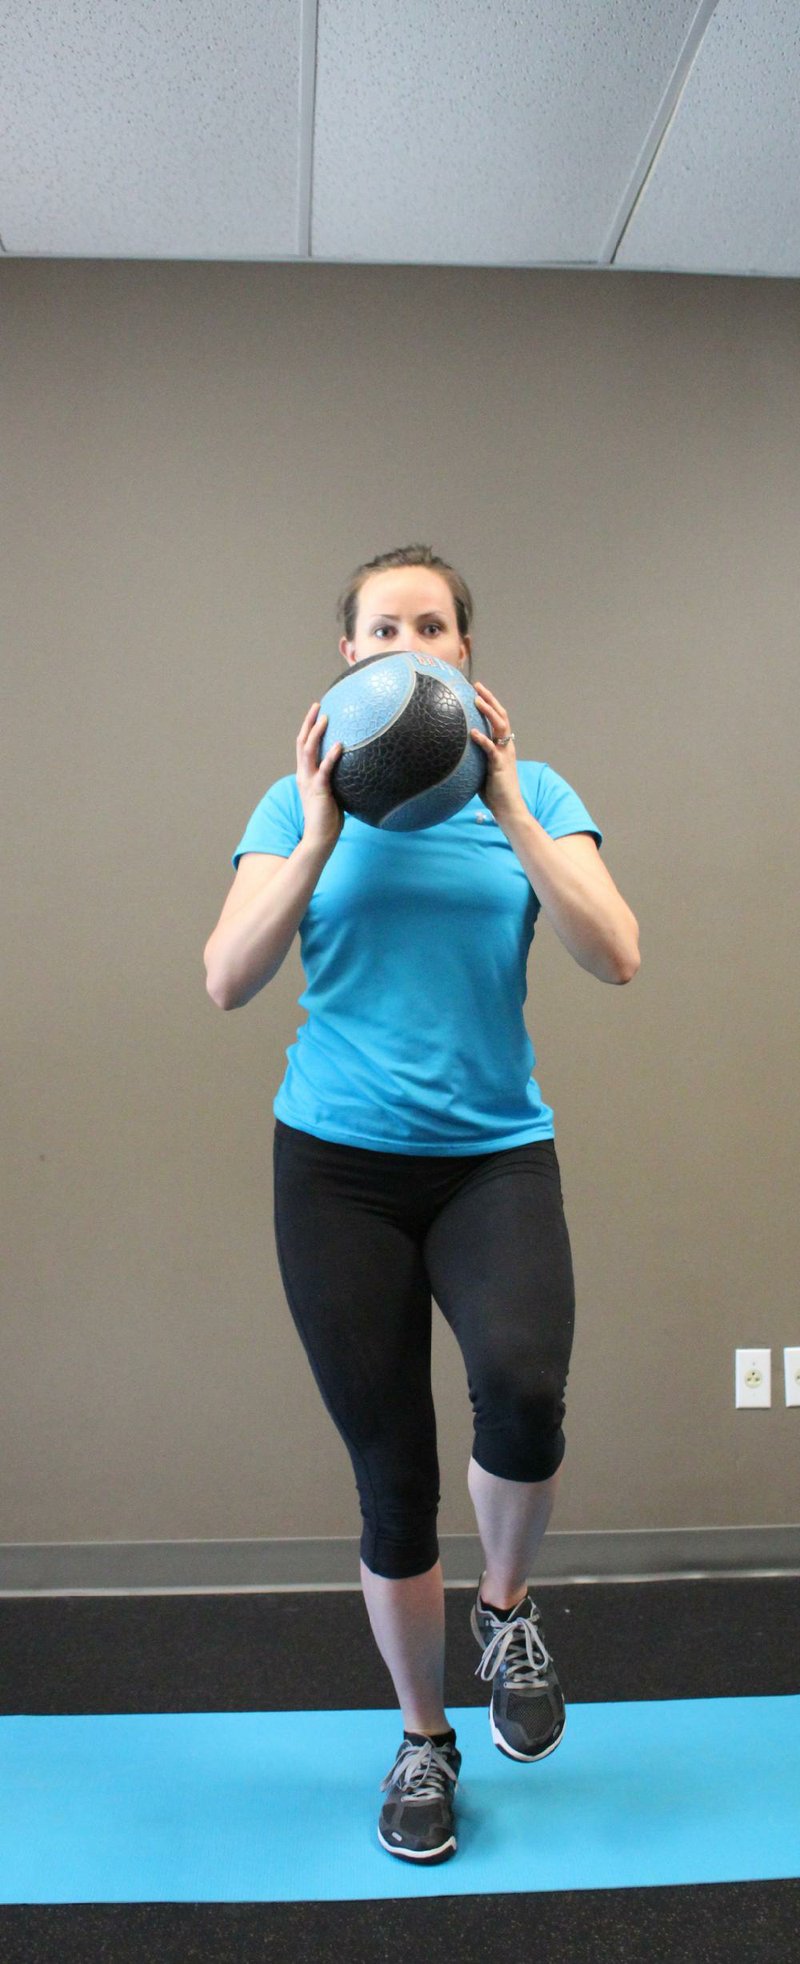 Arkansas Democrat-Gazette/CELIA STOREY
Anna Bolte does the first step of the Single Leg Hop Press exercise for Matt Parrot's Master Class exercise of the week column in ActiveStyle.